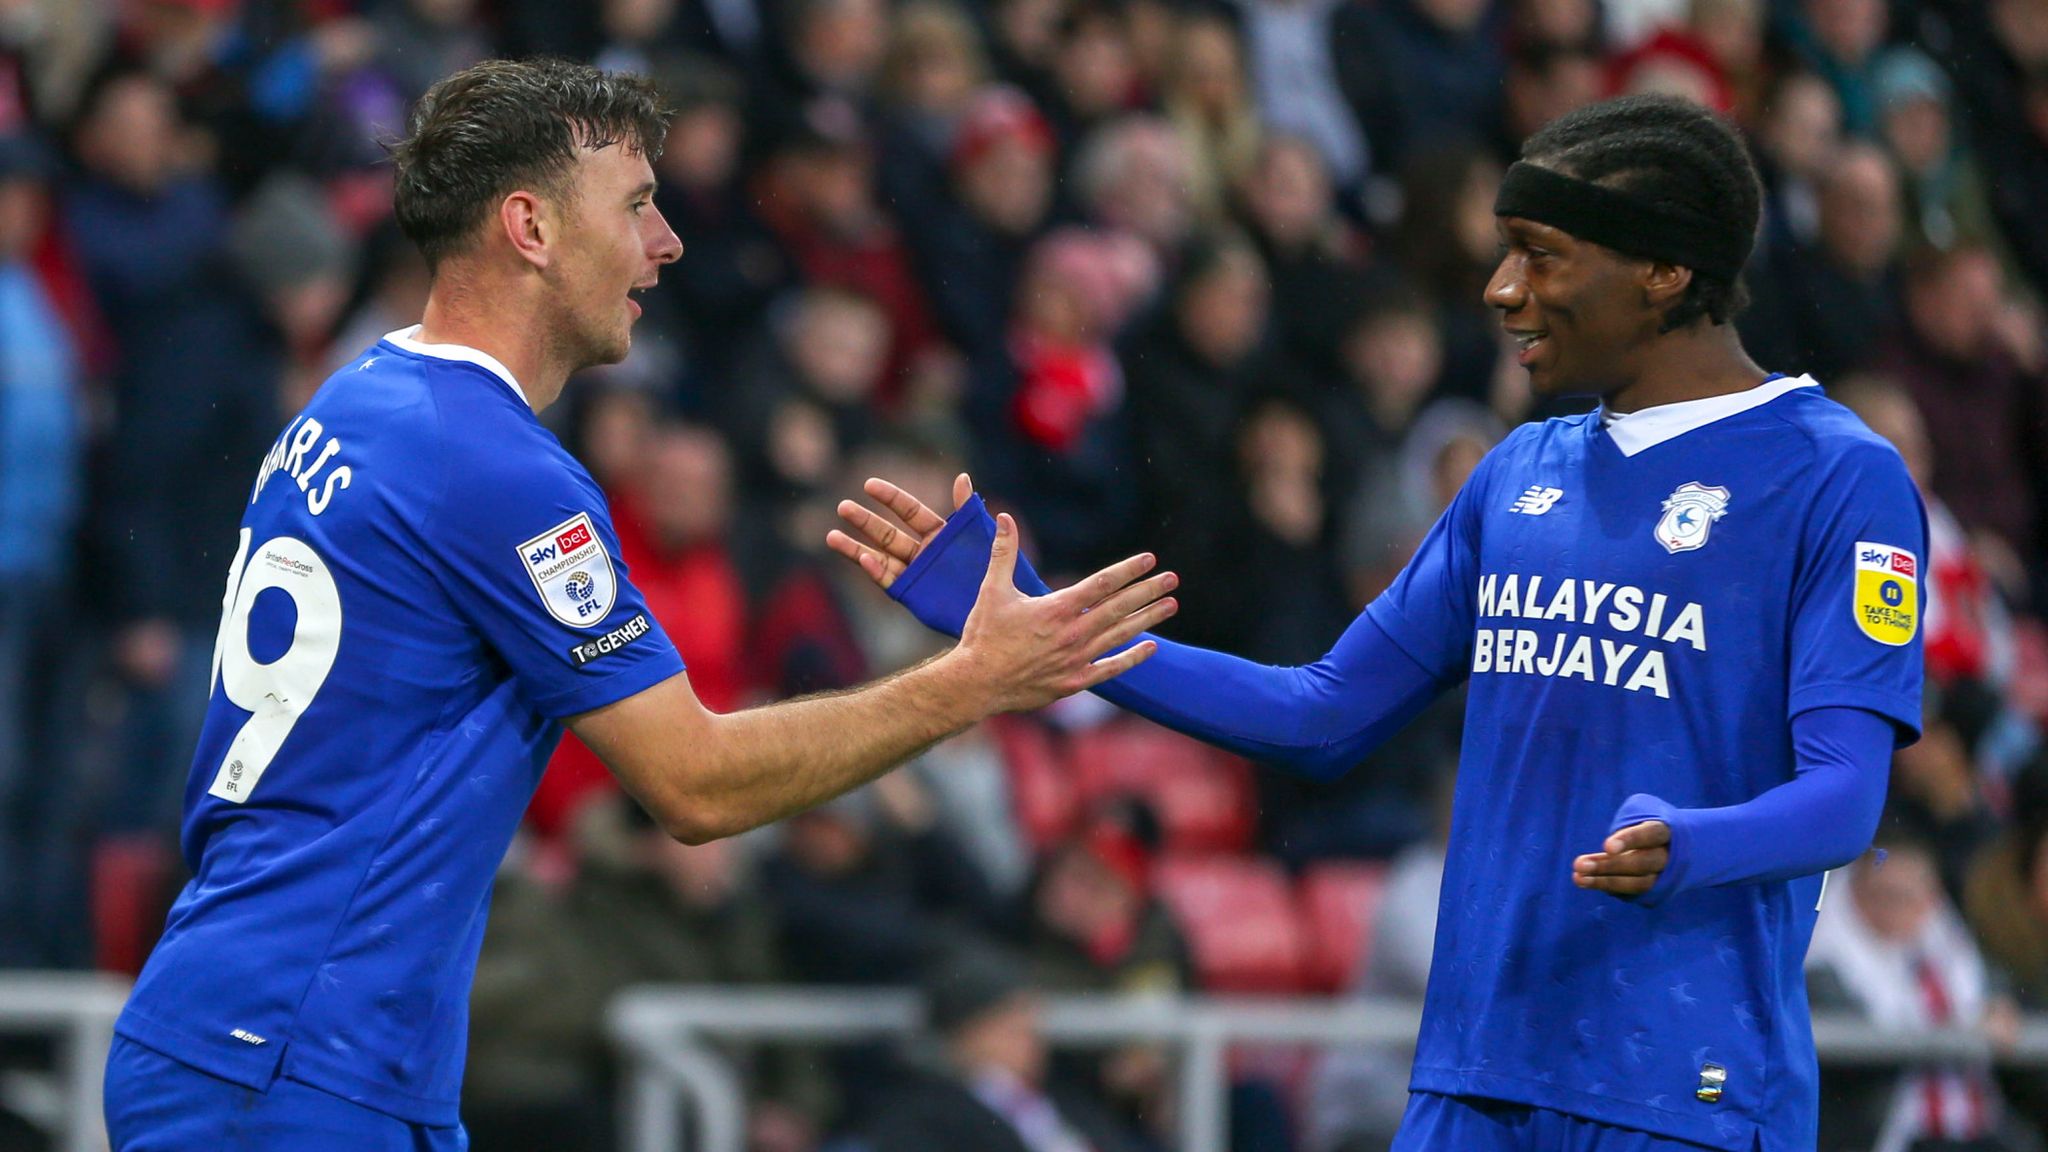 Town fall to table-topping Cardiff City - News - Swindon Town